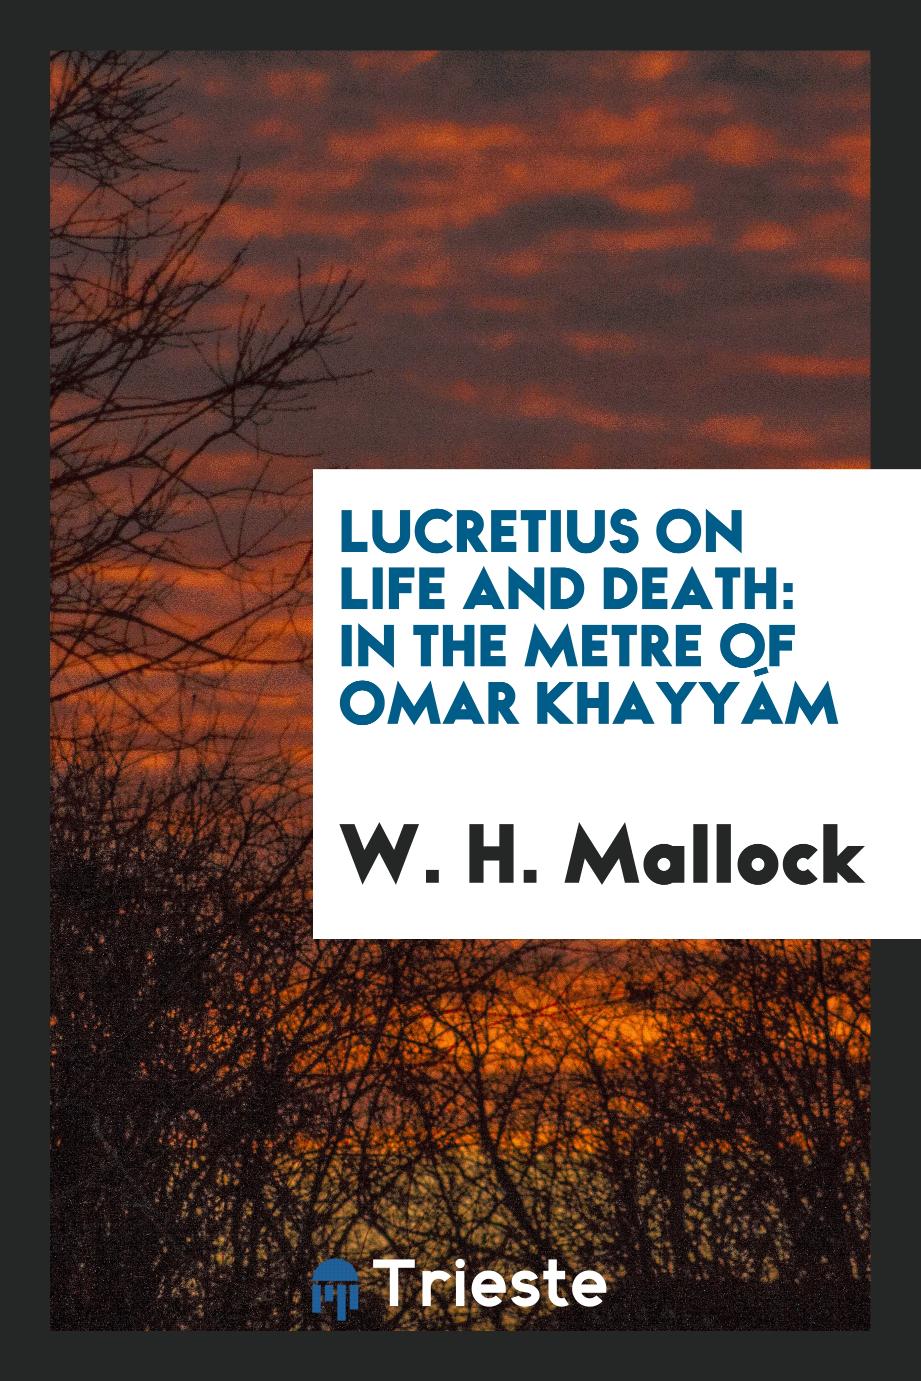 Lucretius on Life and Death: In the Metre of Omar Khayyám